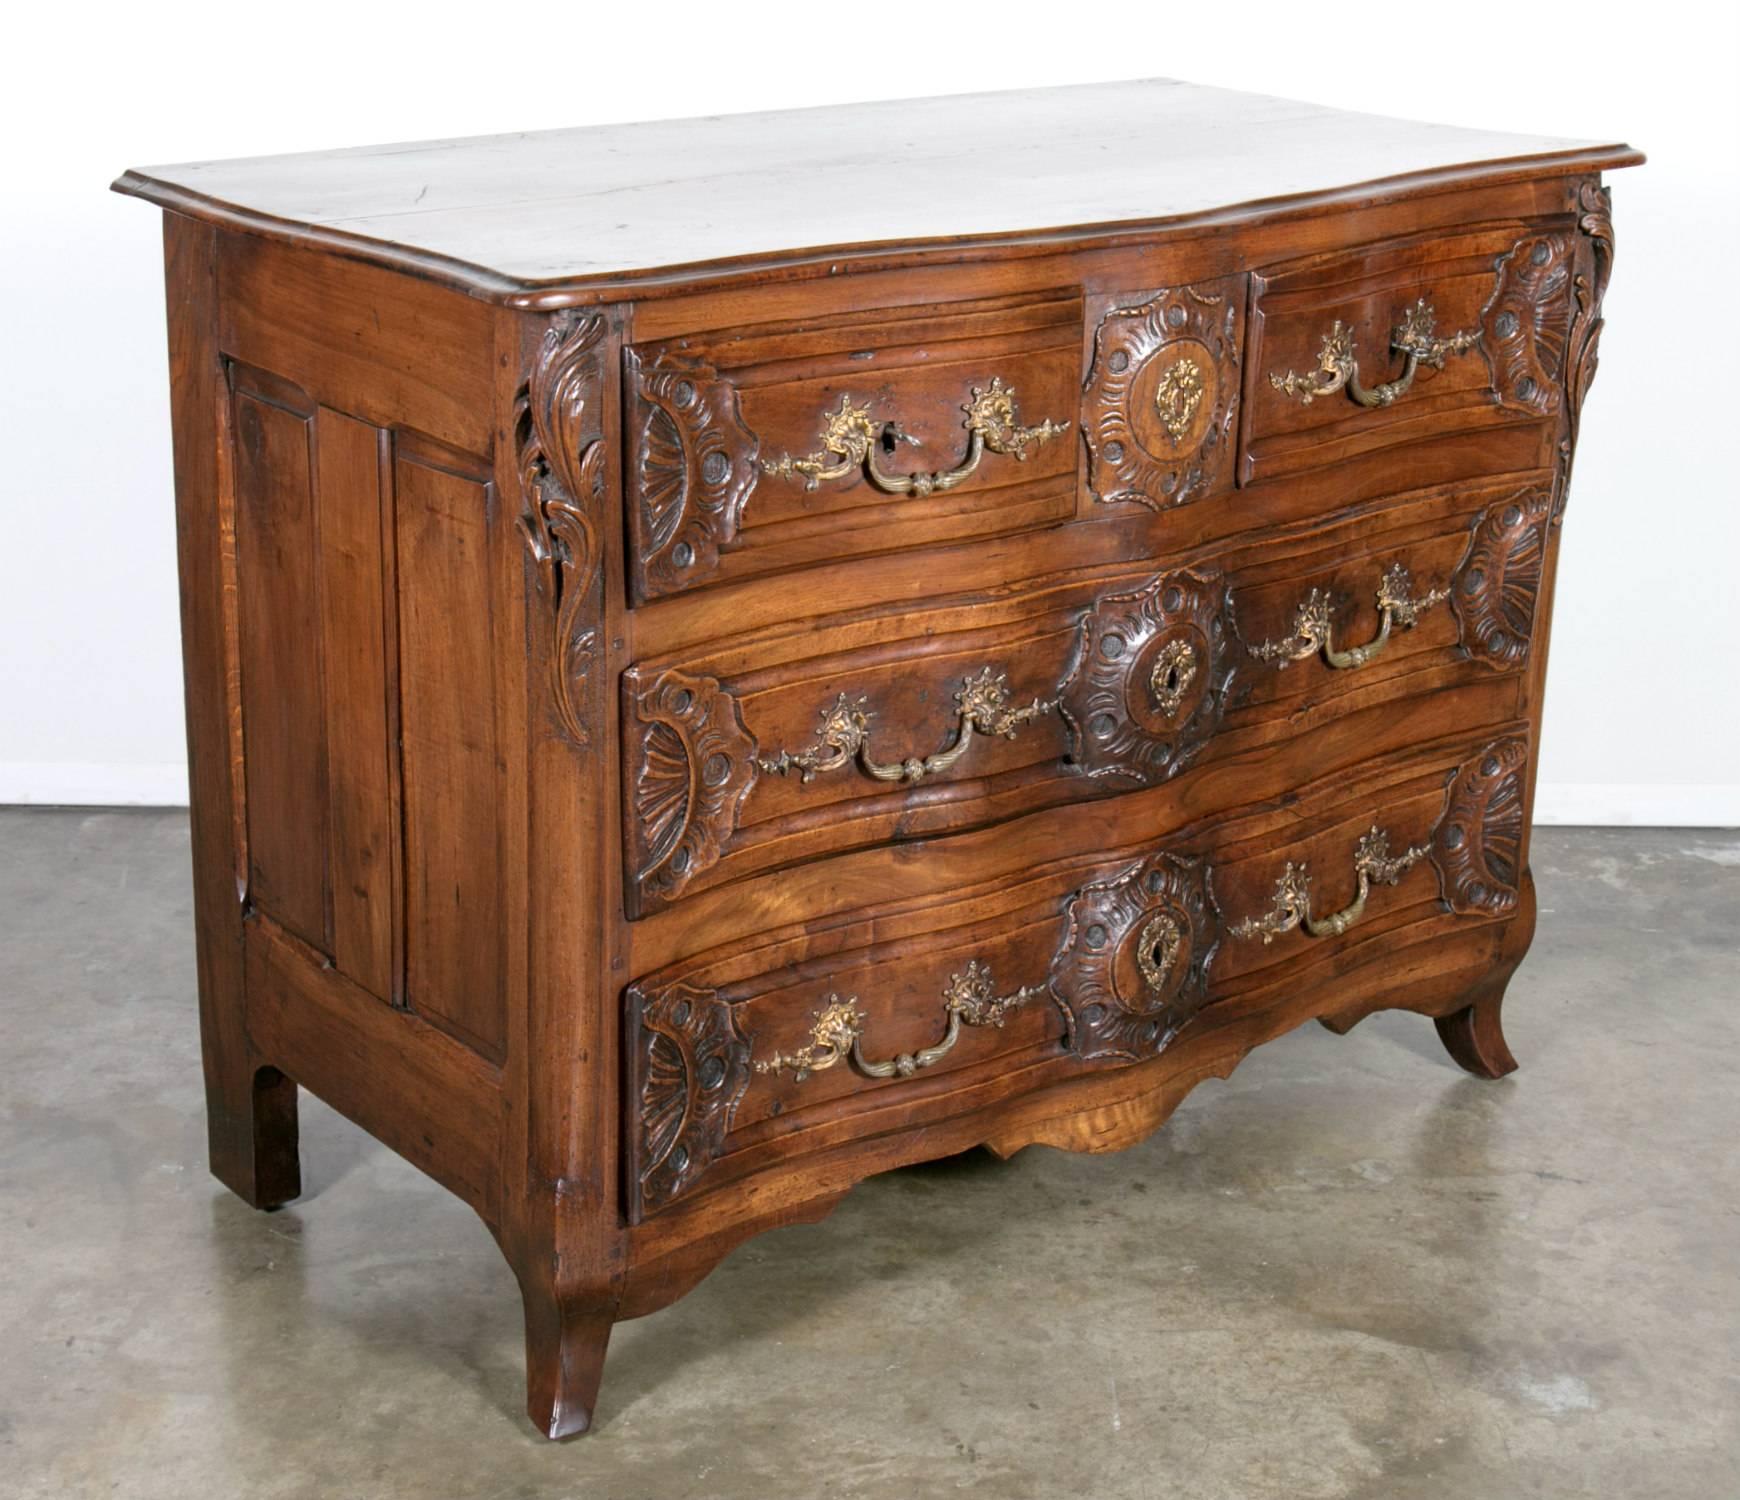 Exceptional and rare early 18th century Regence period Lyonnaise commode galbé (curved), handcrafted from select French walnut by master artisans in the region surrounding Lyon, circa 1720. Having a curved front, the drawers are arranged in a